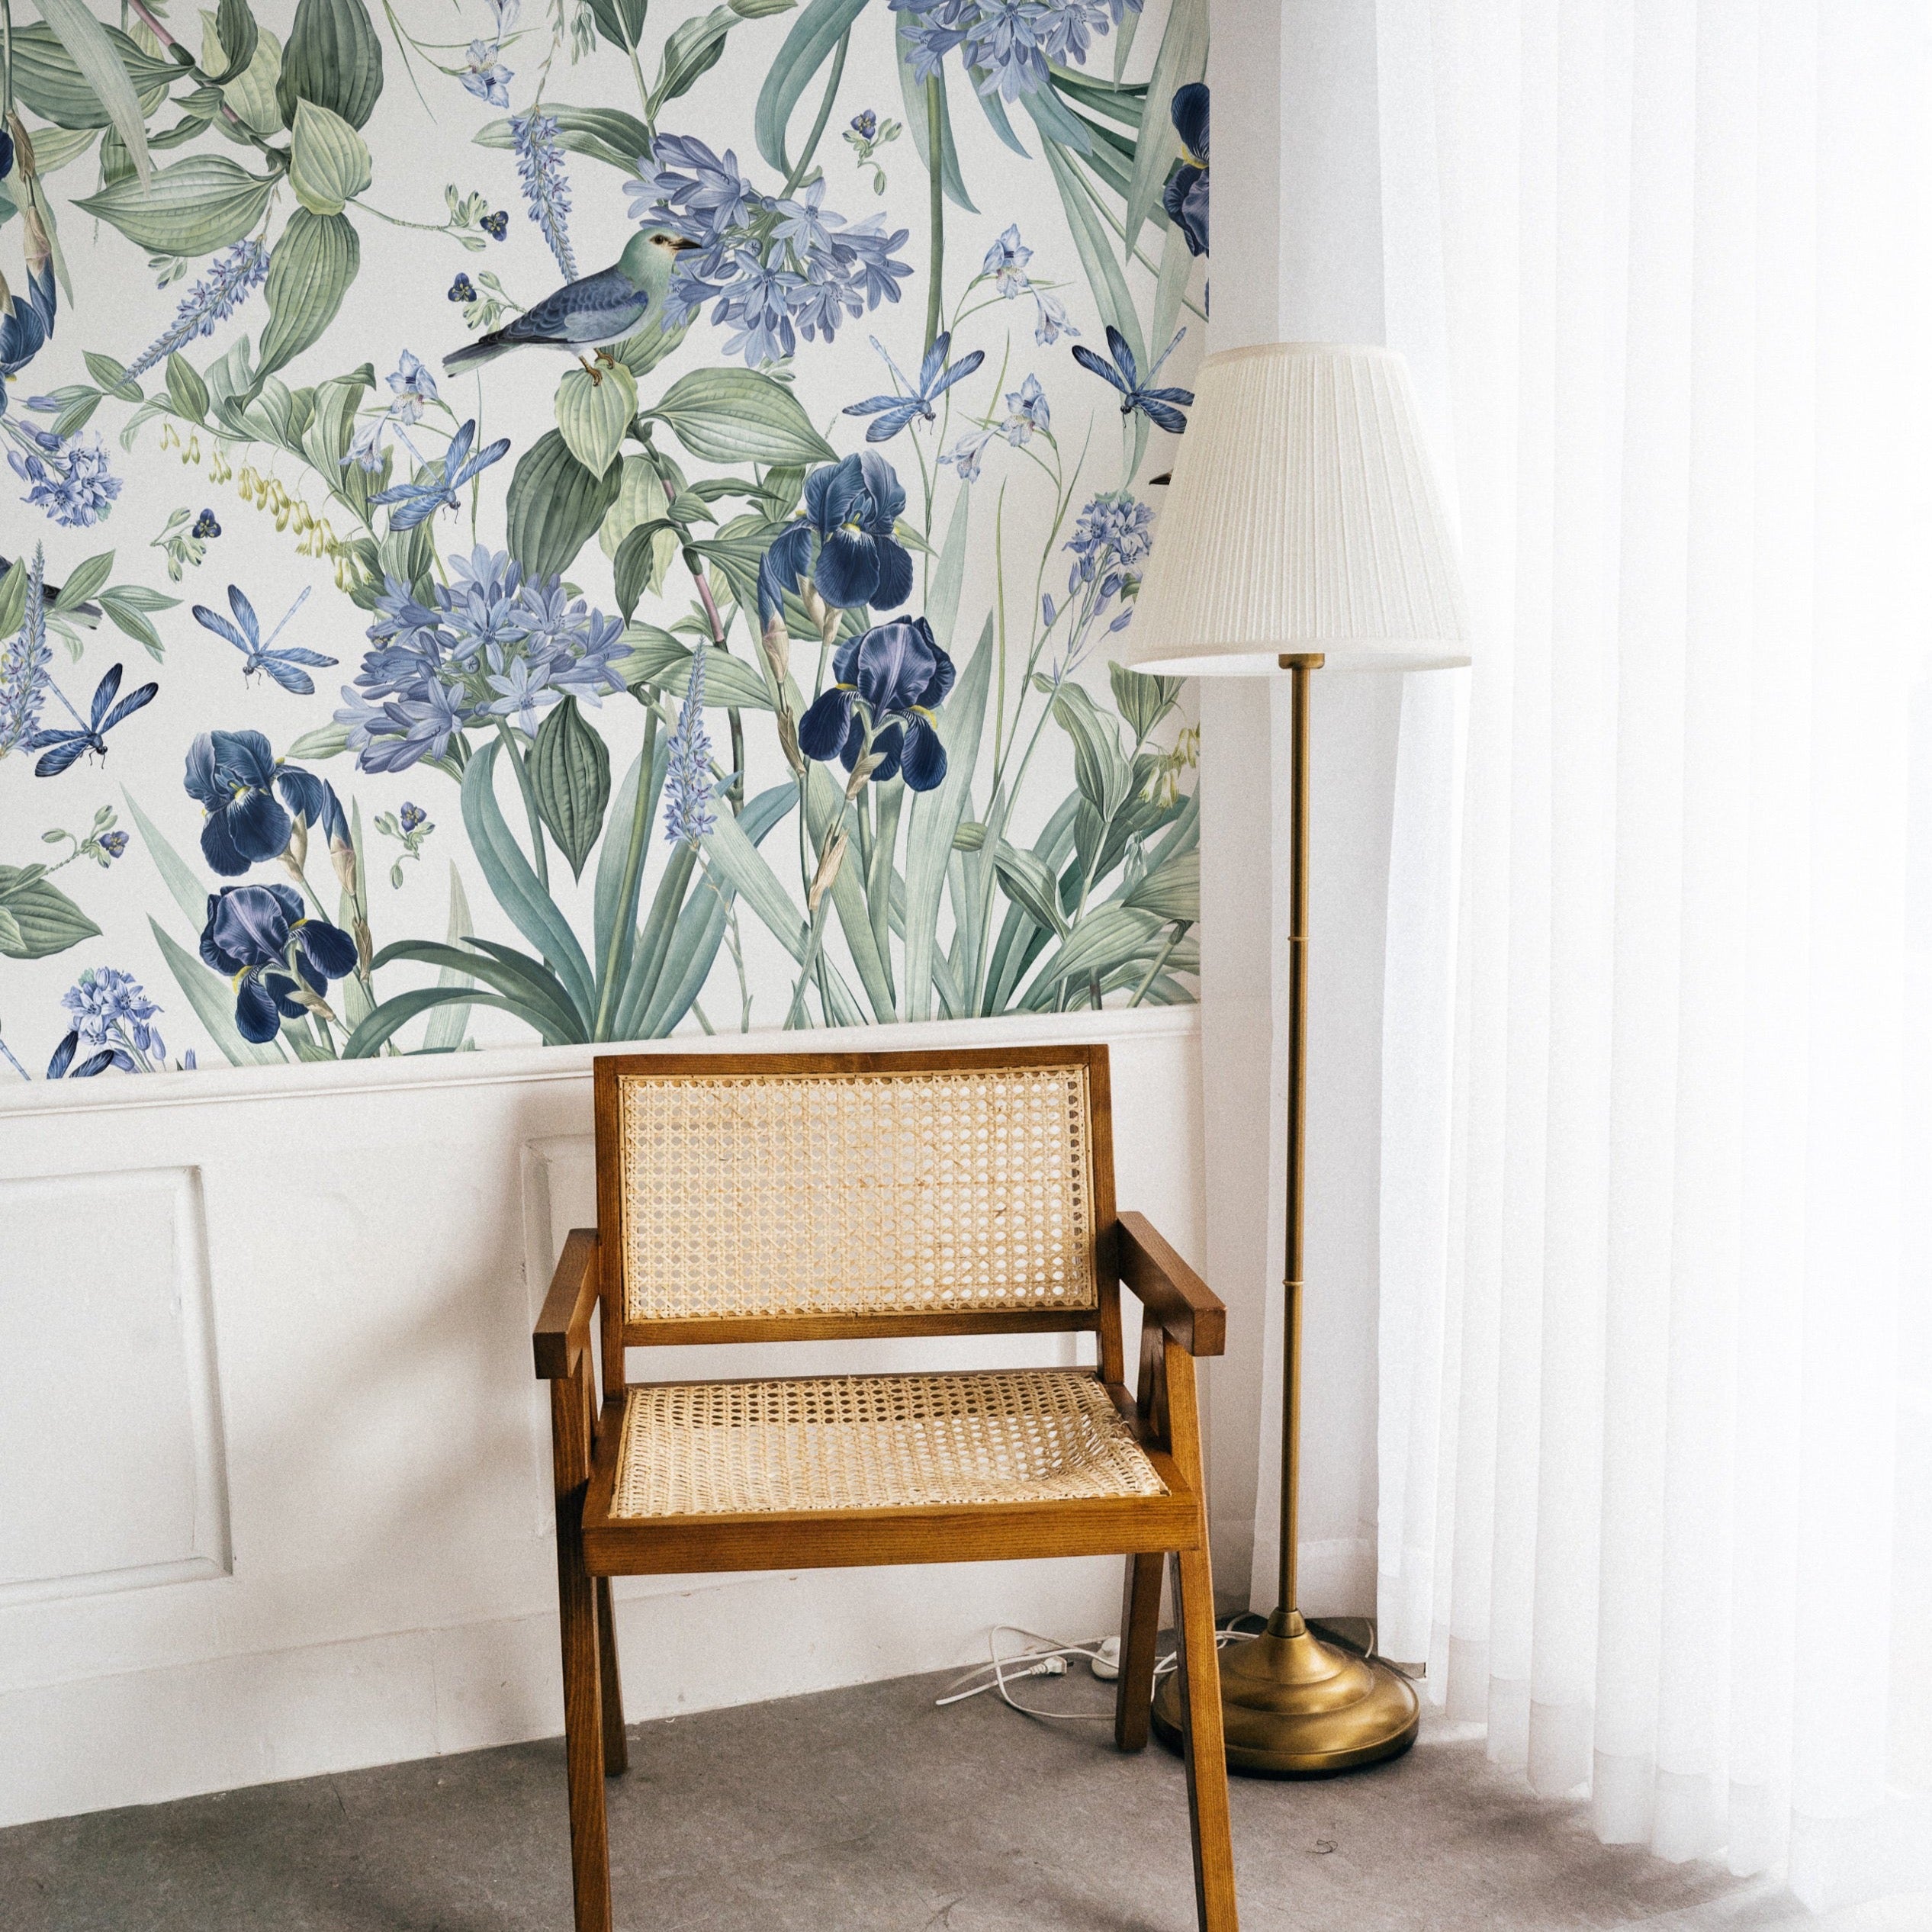 A cozy reading nook with the 'Mint Floral Wallpaper - 50"' adorning the wall, accompanied by a vintage wooden chair with wicker seating and a classic floor lamp, creating an inviting and warm atmosphere.